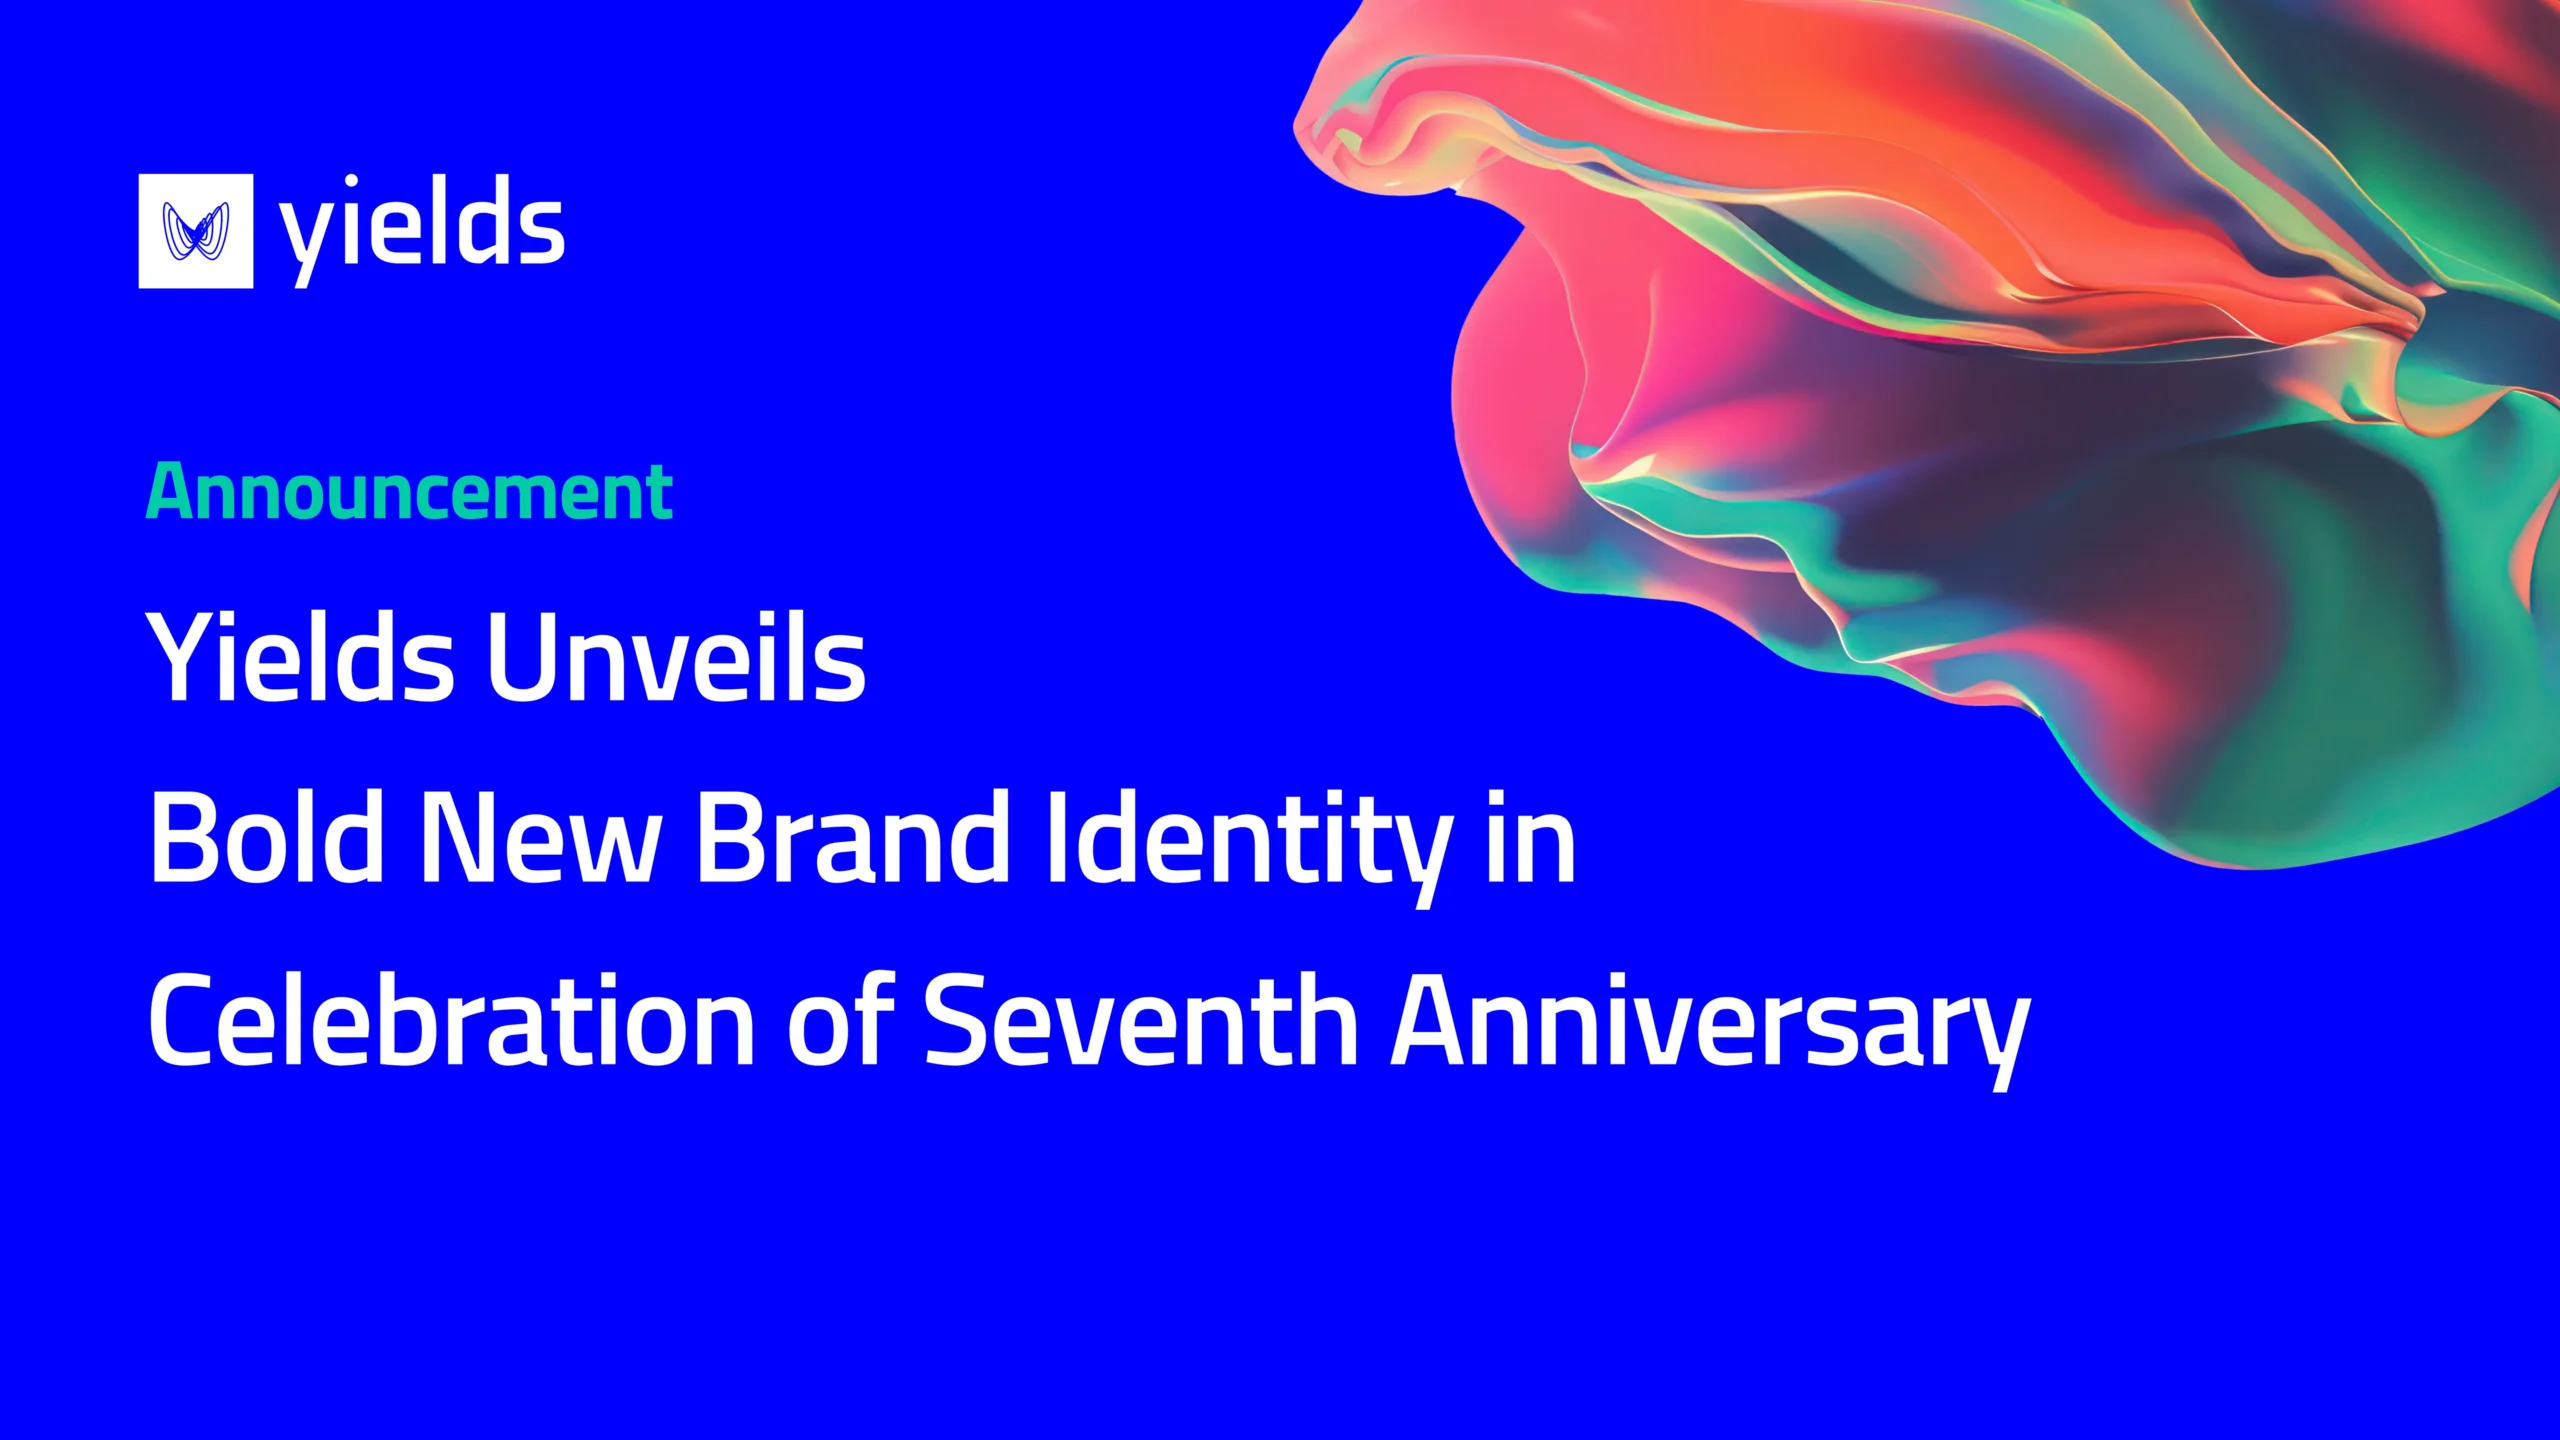 Yields Unveils Bold New Brand Identity in Celebration of Seventh Anniversary